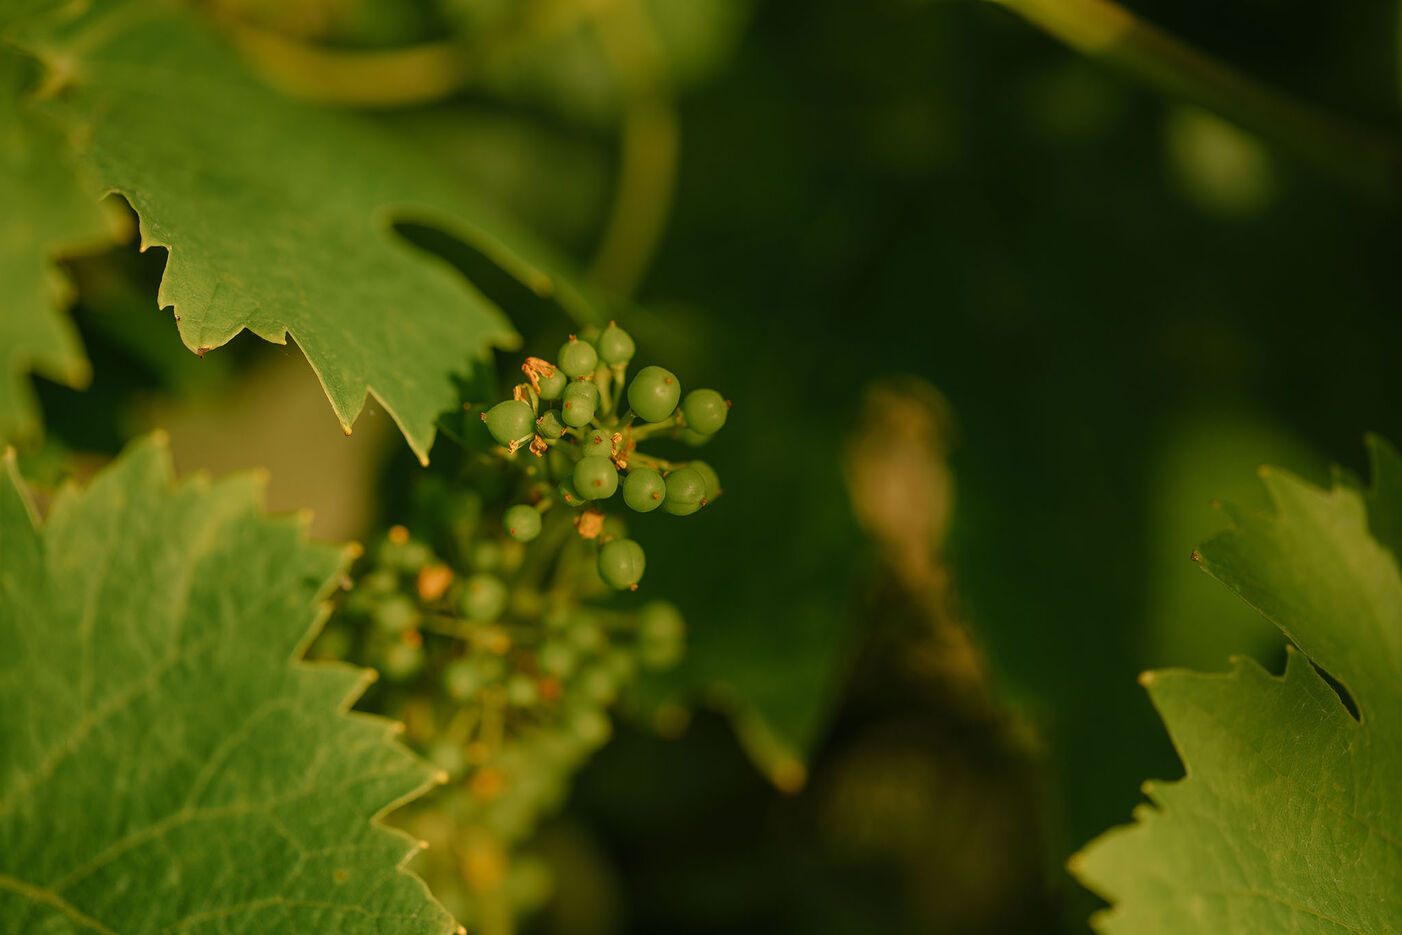 A nature photo of small grapes among green leaves